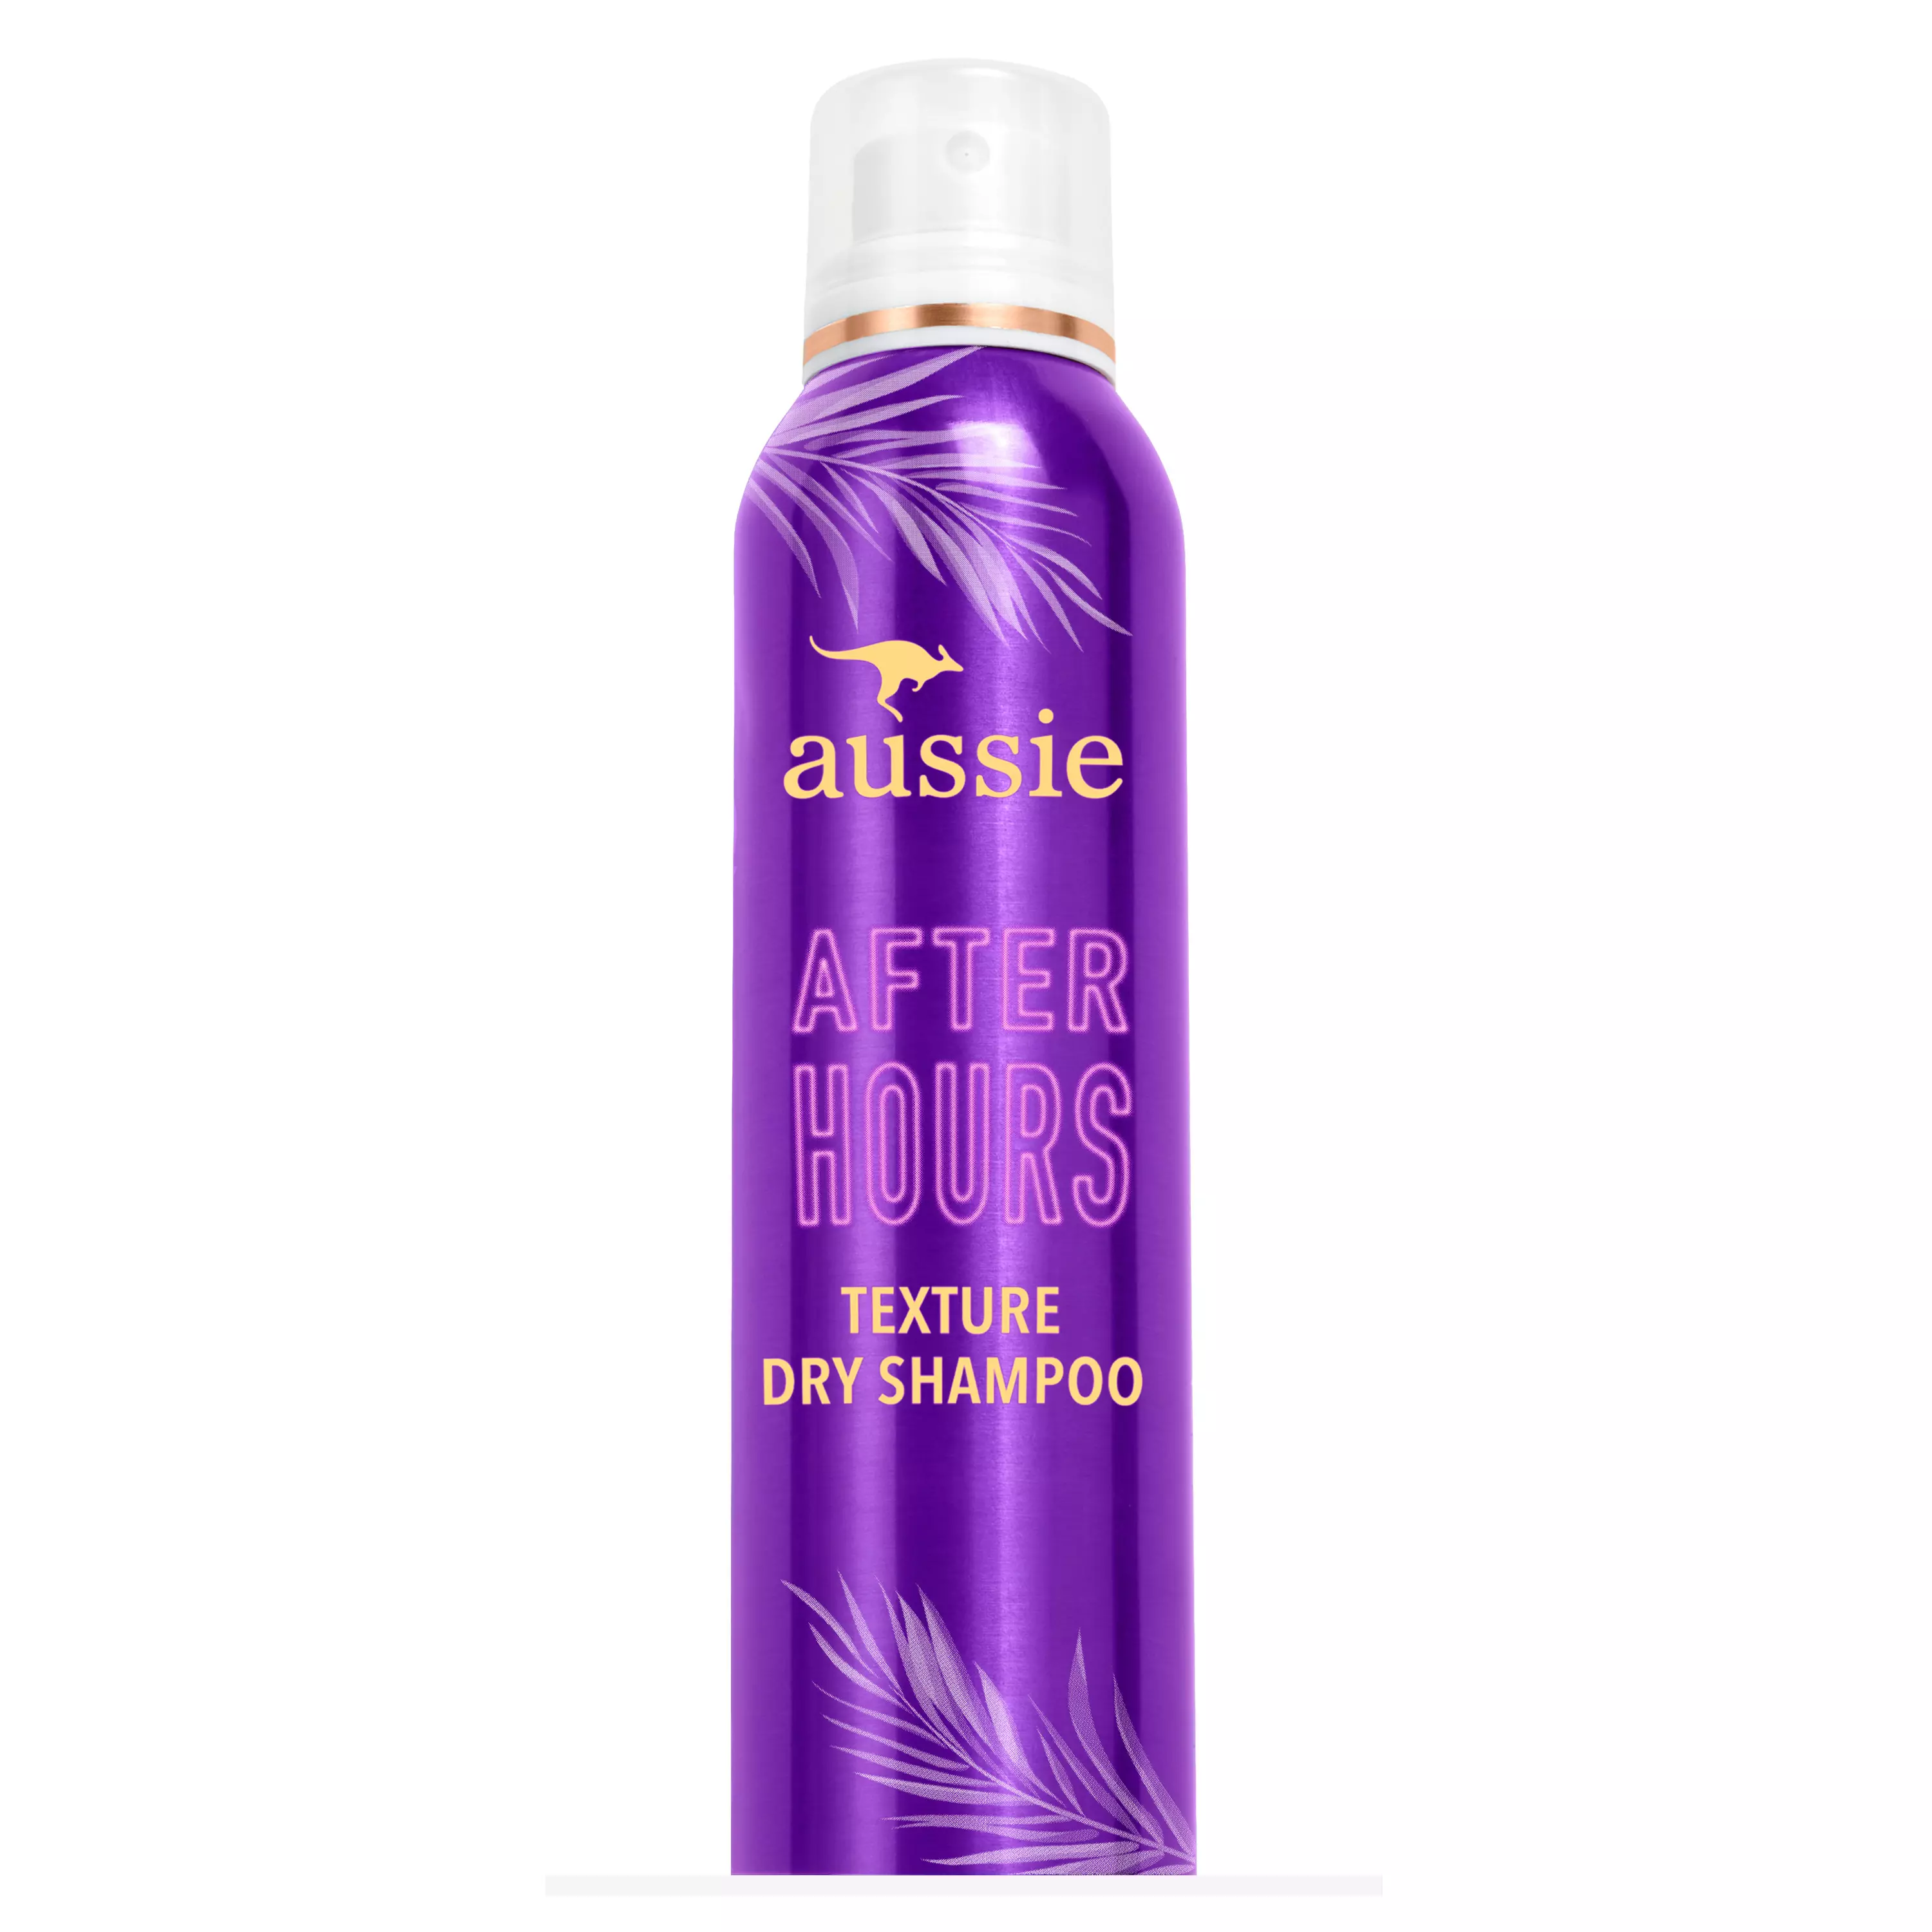 aussie After Hours Texture Dry Shampoo